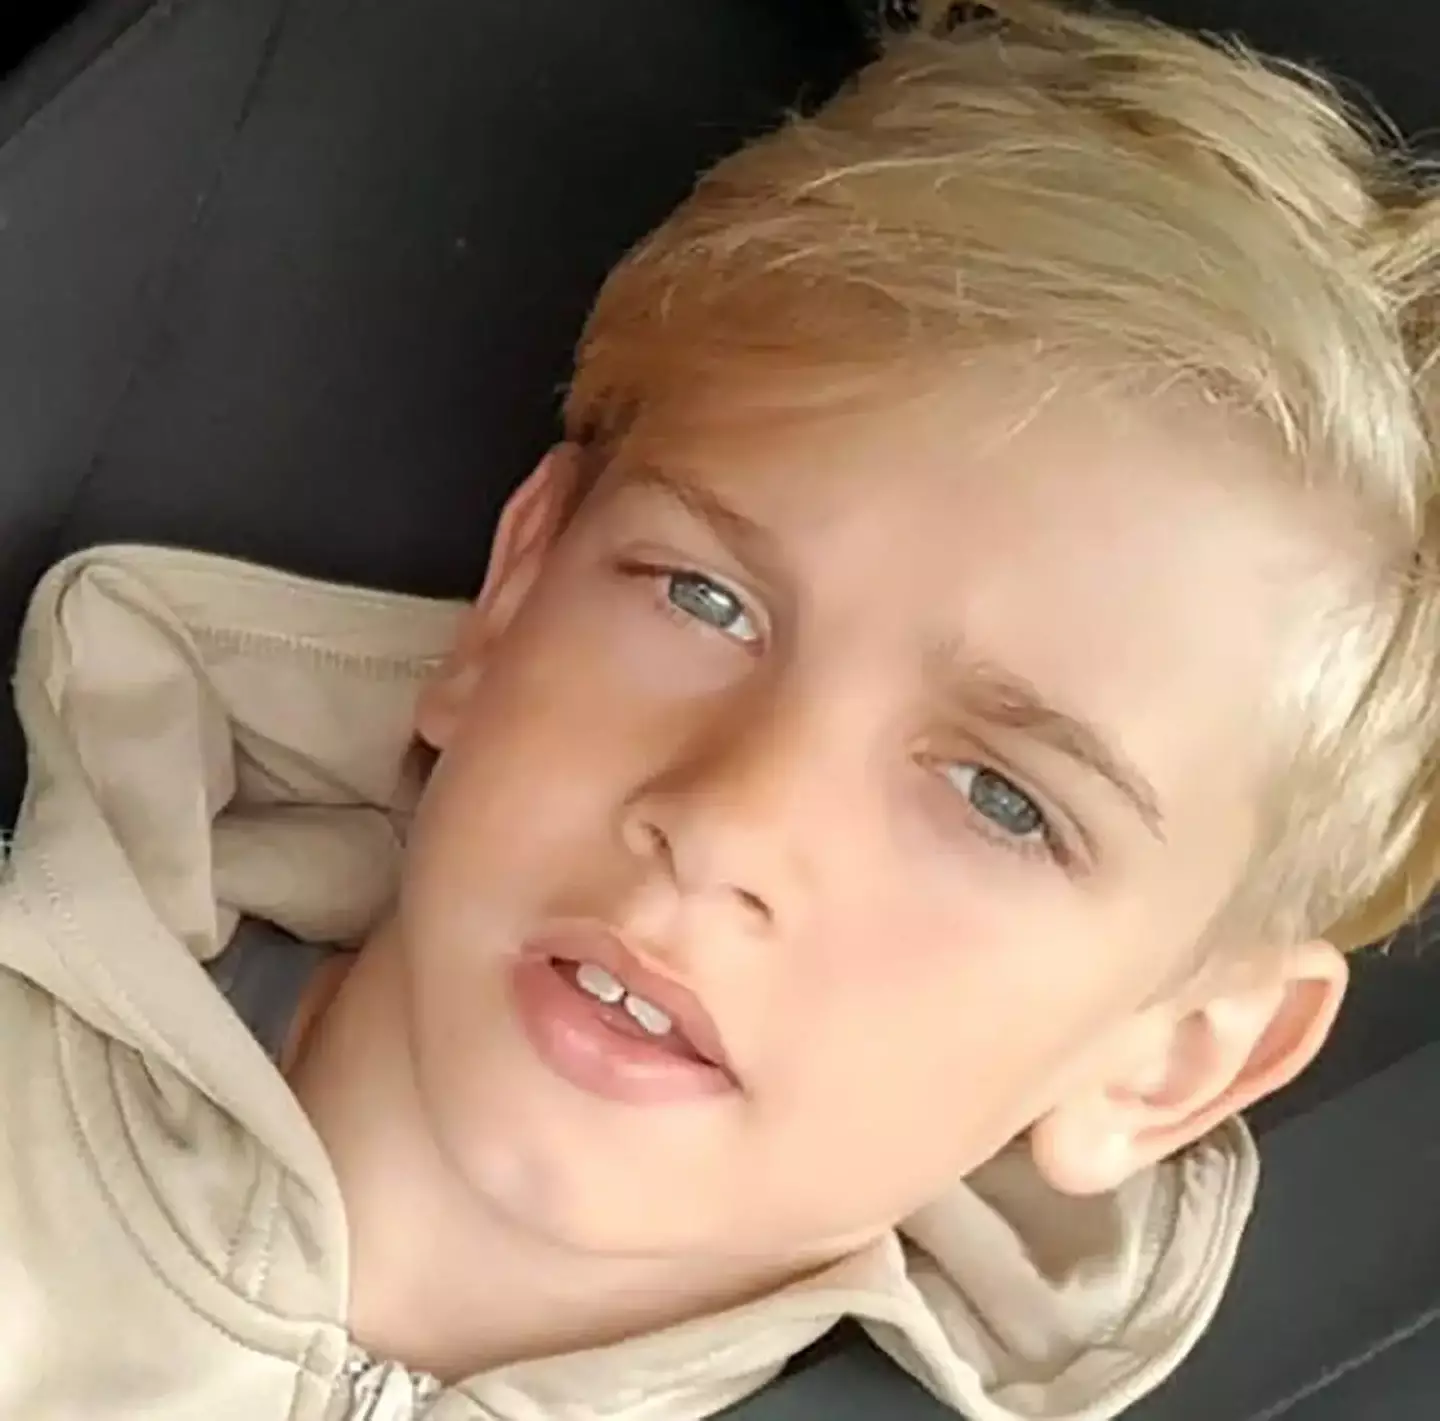 The High Court has ruled that 12-year-old Archie Battersbee should be allowed to die.